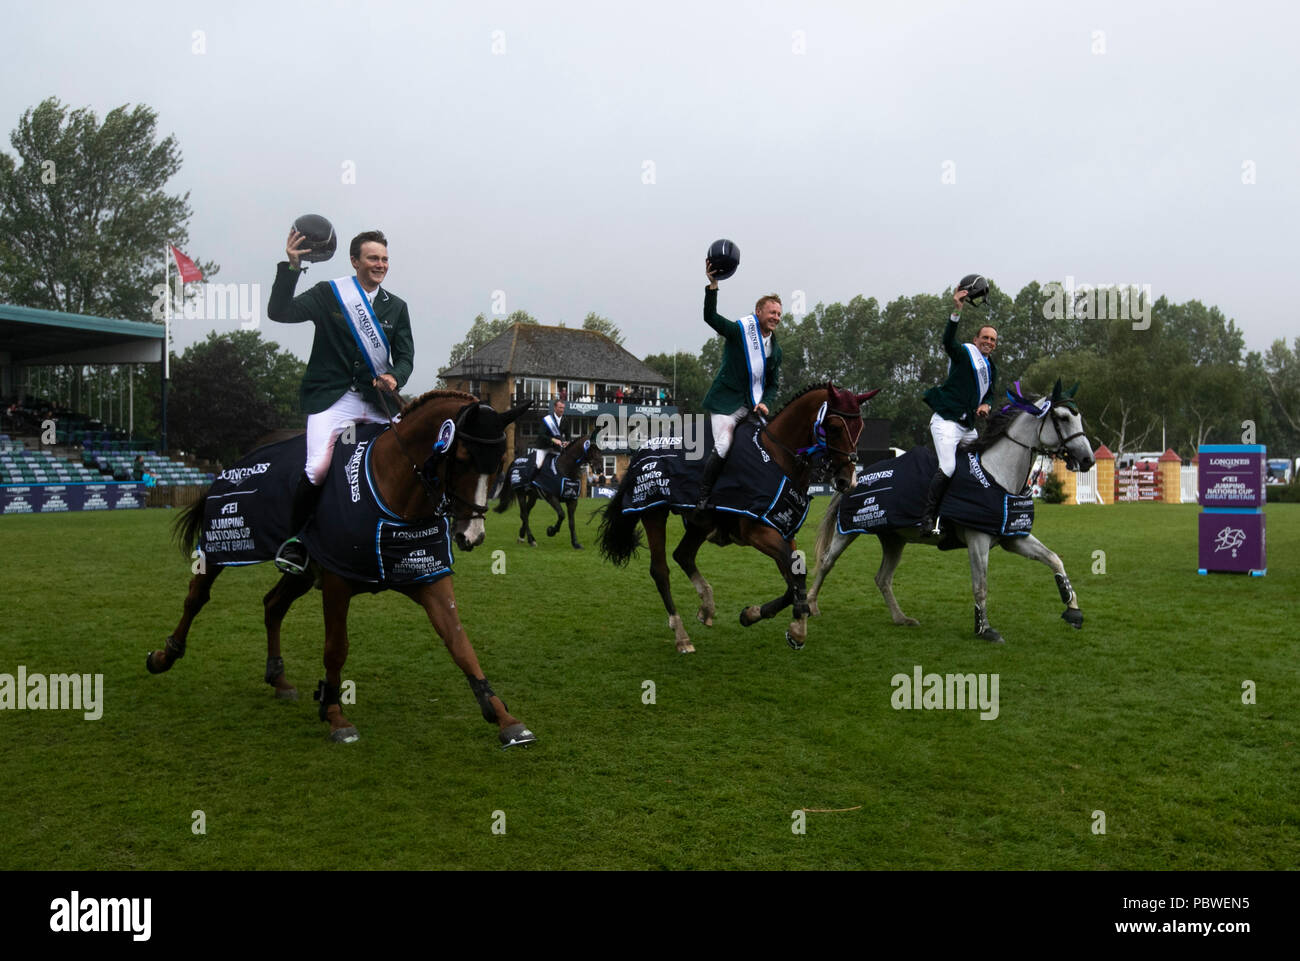 Hickstead(Britain. 30th July, 2018. Team Ireland celebrate after the awarding ceremony for the Longines FEI Jumping Nations Cup in Hickstead, Britain on July 29, 2018. Team Ireland claimed the title. Credit: Han Yan/Xinhua/Alamy Live News Stock Photo